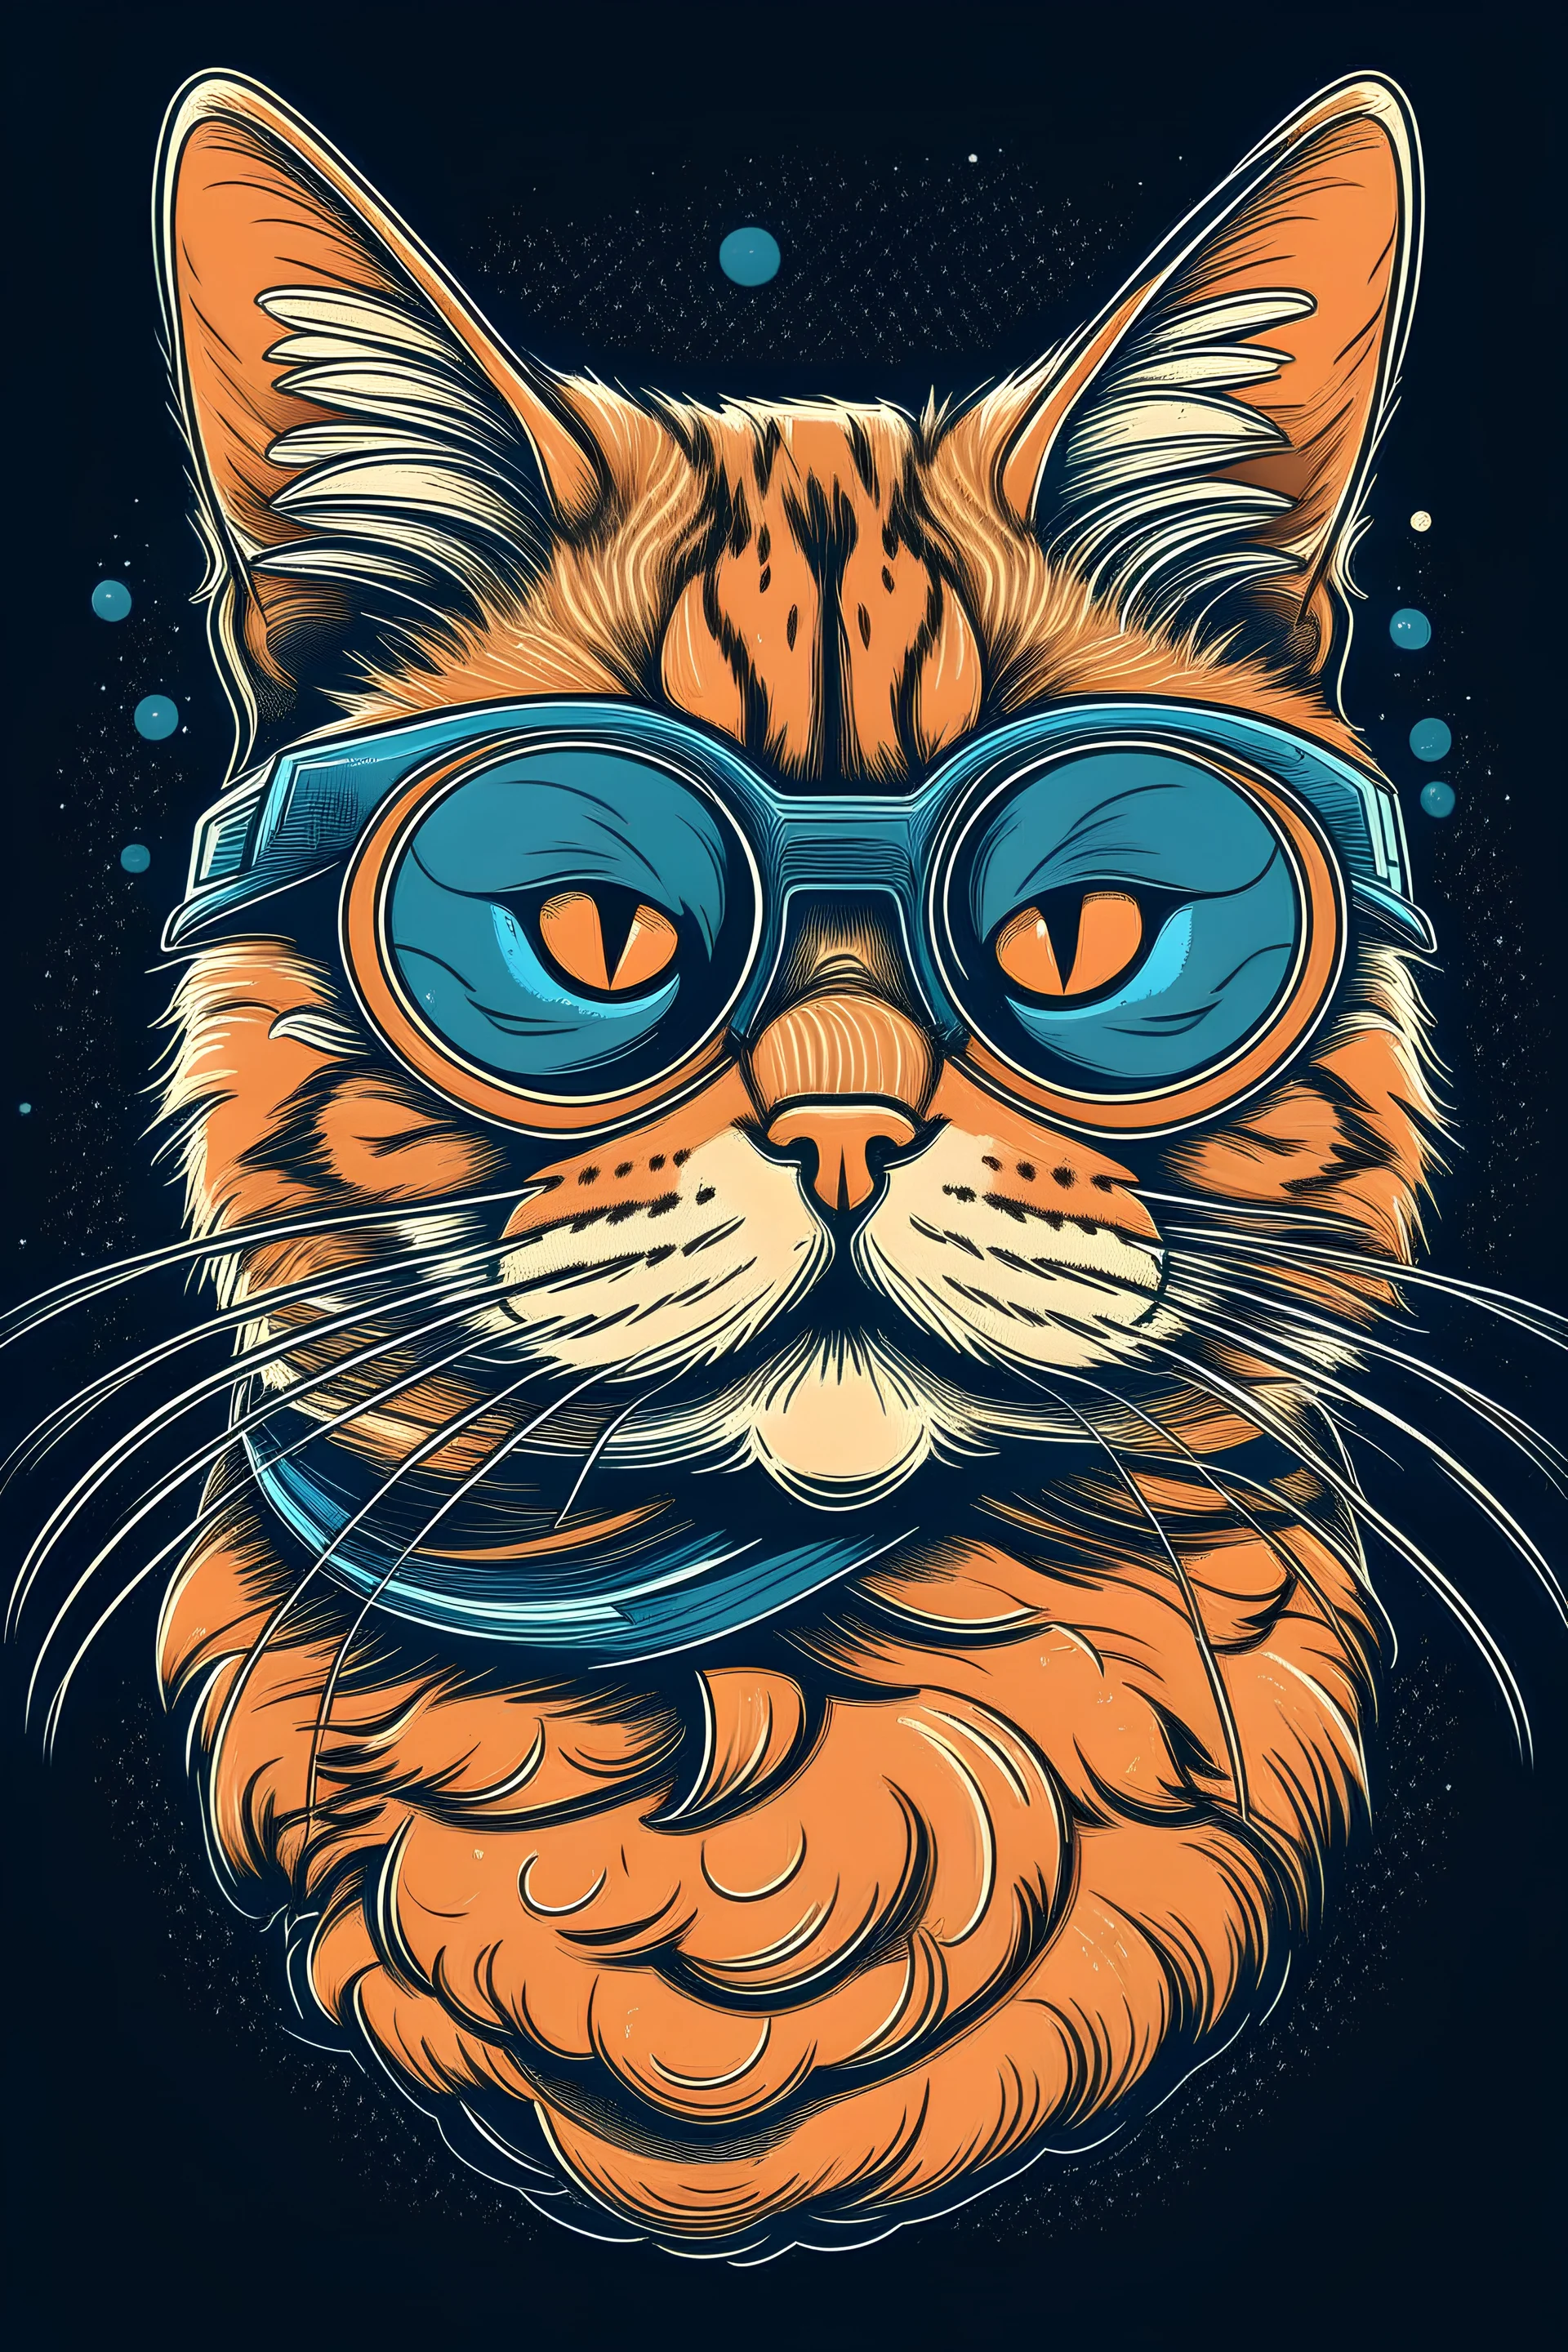 CAT AND FISH wearing sunglasses, Style: NEW, Mood: Groovy, T-shirt design graphic, vector, contour, WITH background.